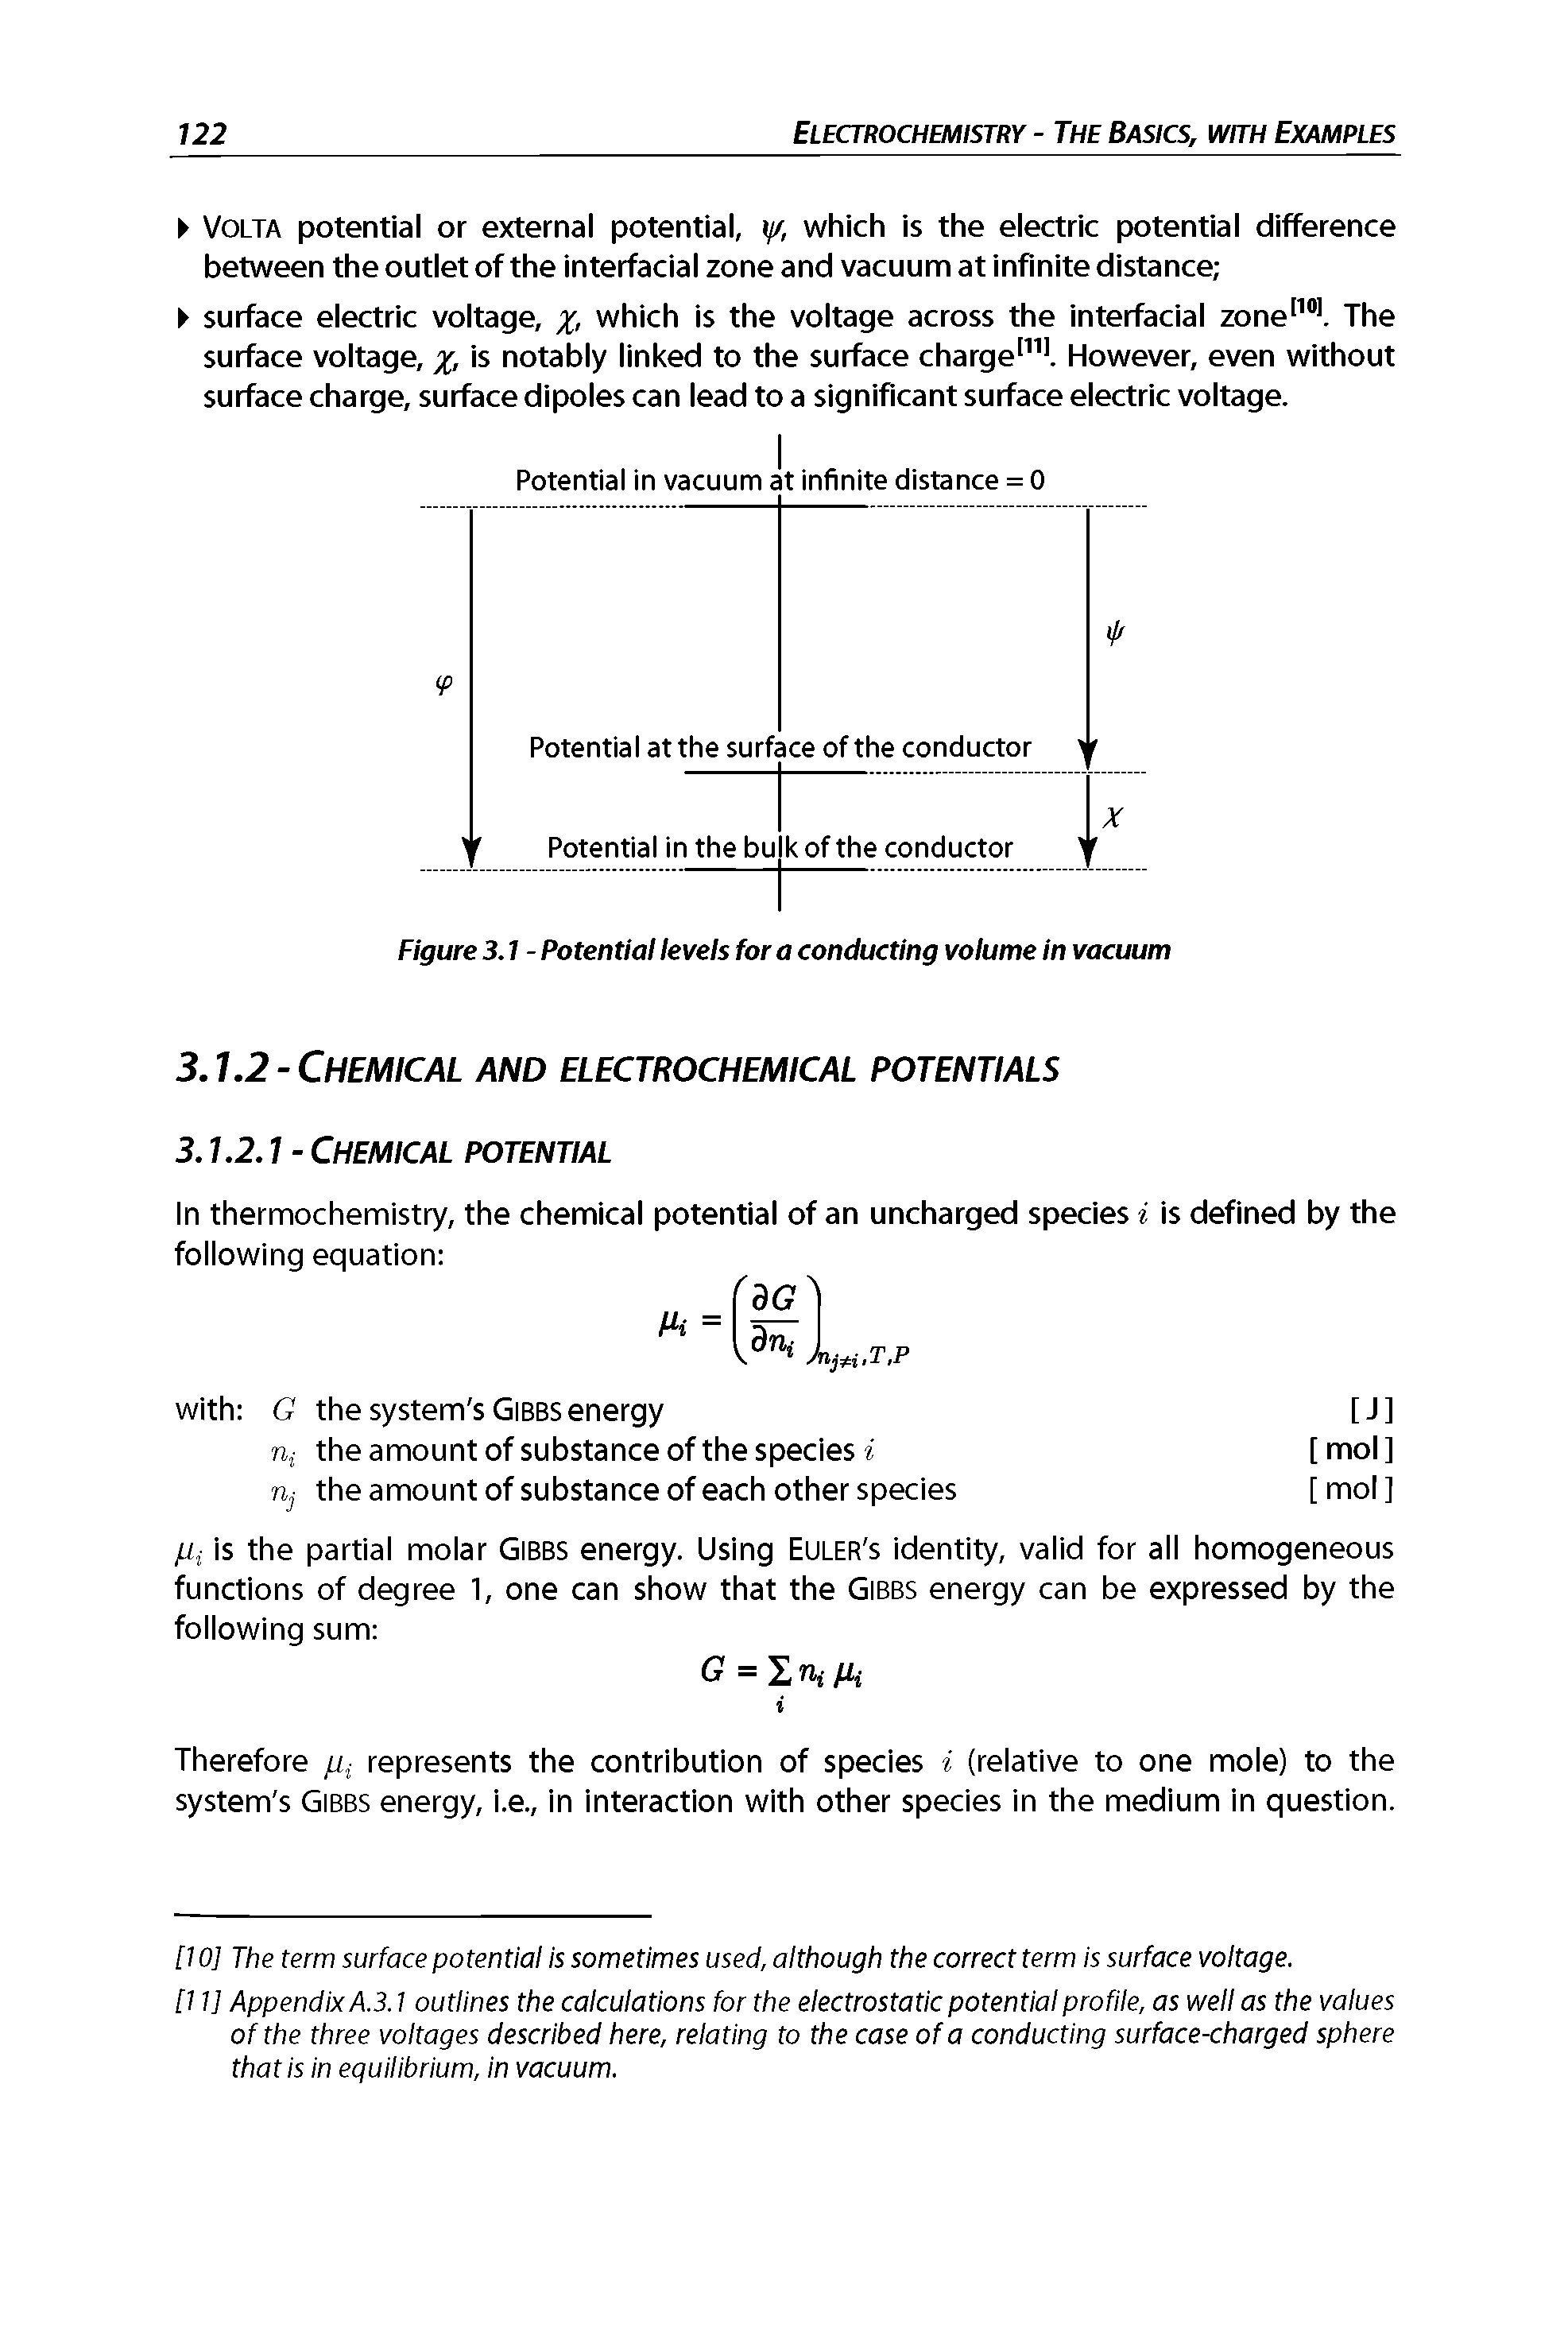 Figure 3.1 - Potential levels for a conducting volume In vacuum...